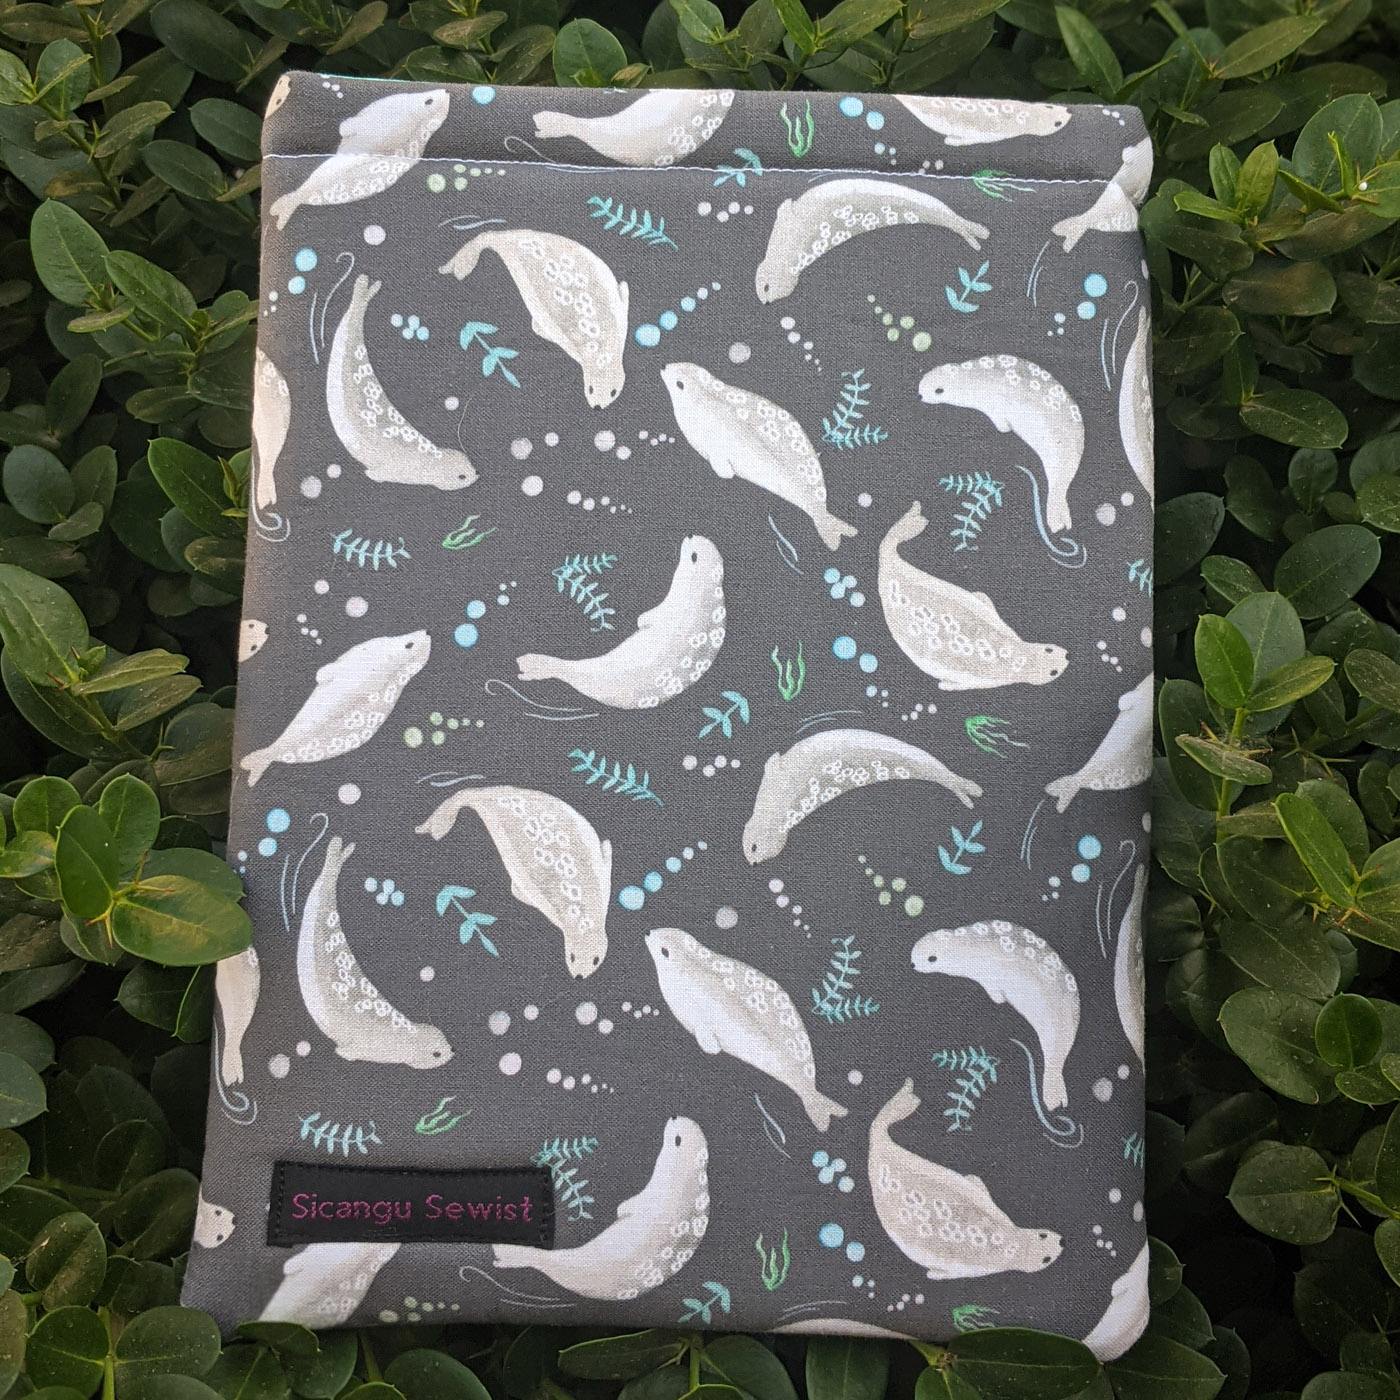 Alt text: A medium-sized handmade book sleeve created by Lorna "Emmy" Her Many Horses out of a fabric that features playful grey seals (or sea lions) and small plant-like shapes in an aqua color. Available on Emmy’s Etsy shop, The Sičángu Sewist for USD$22.